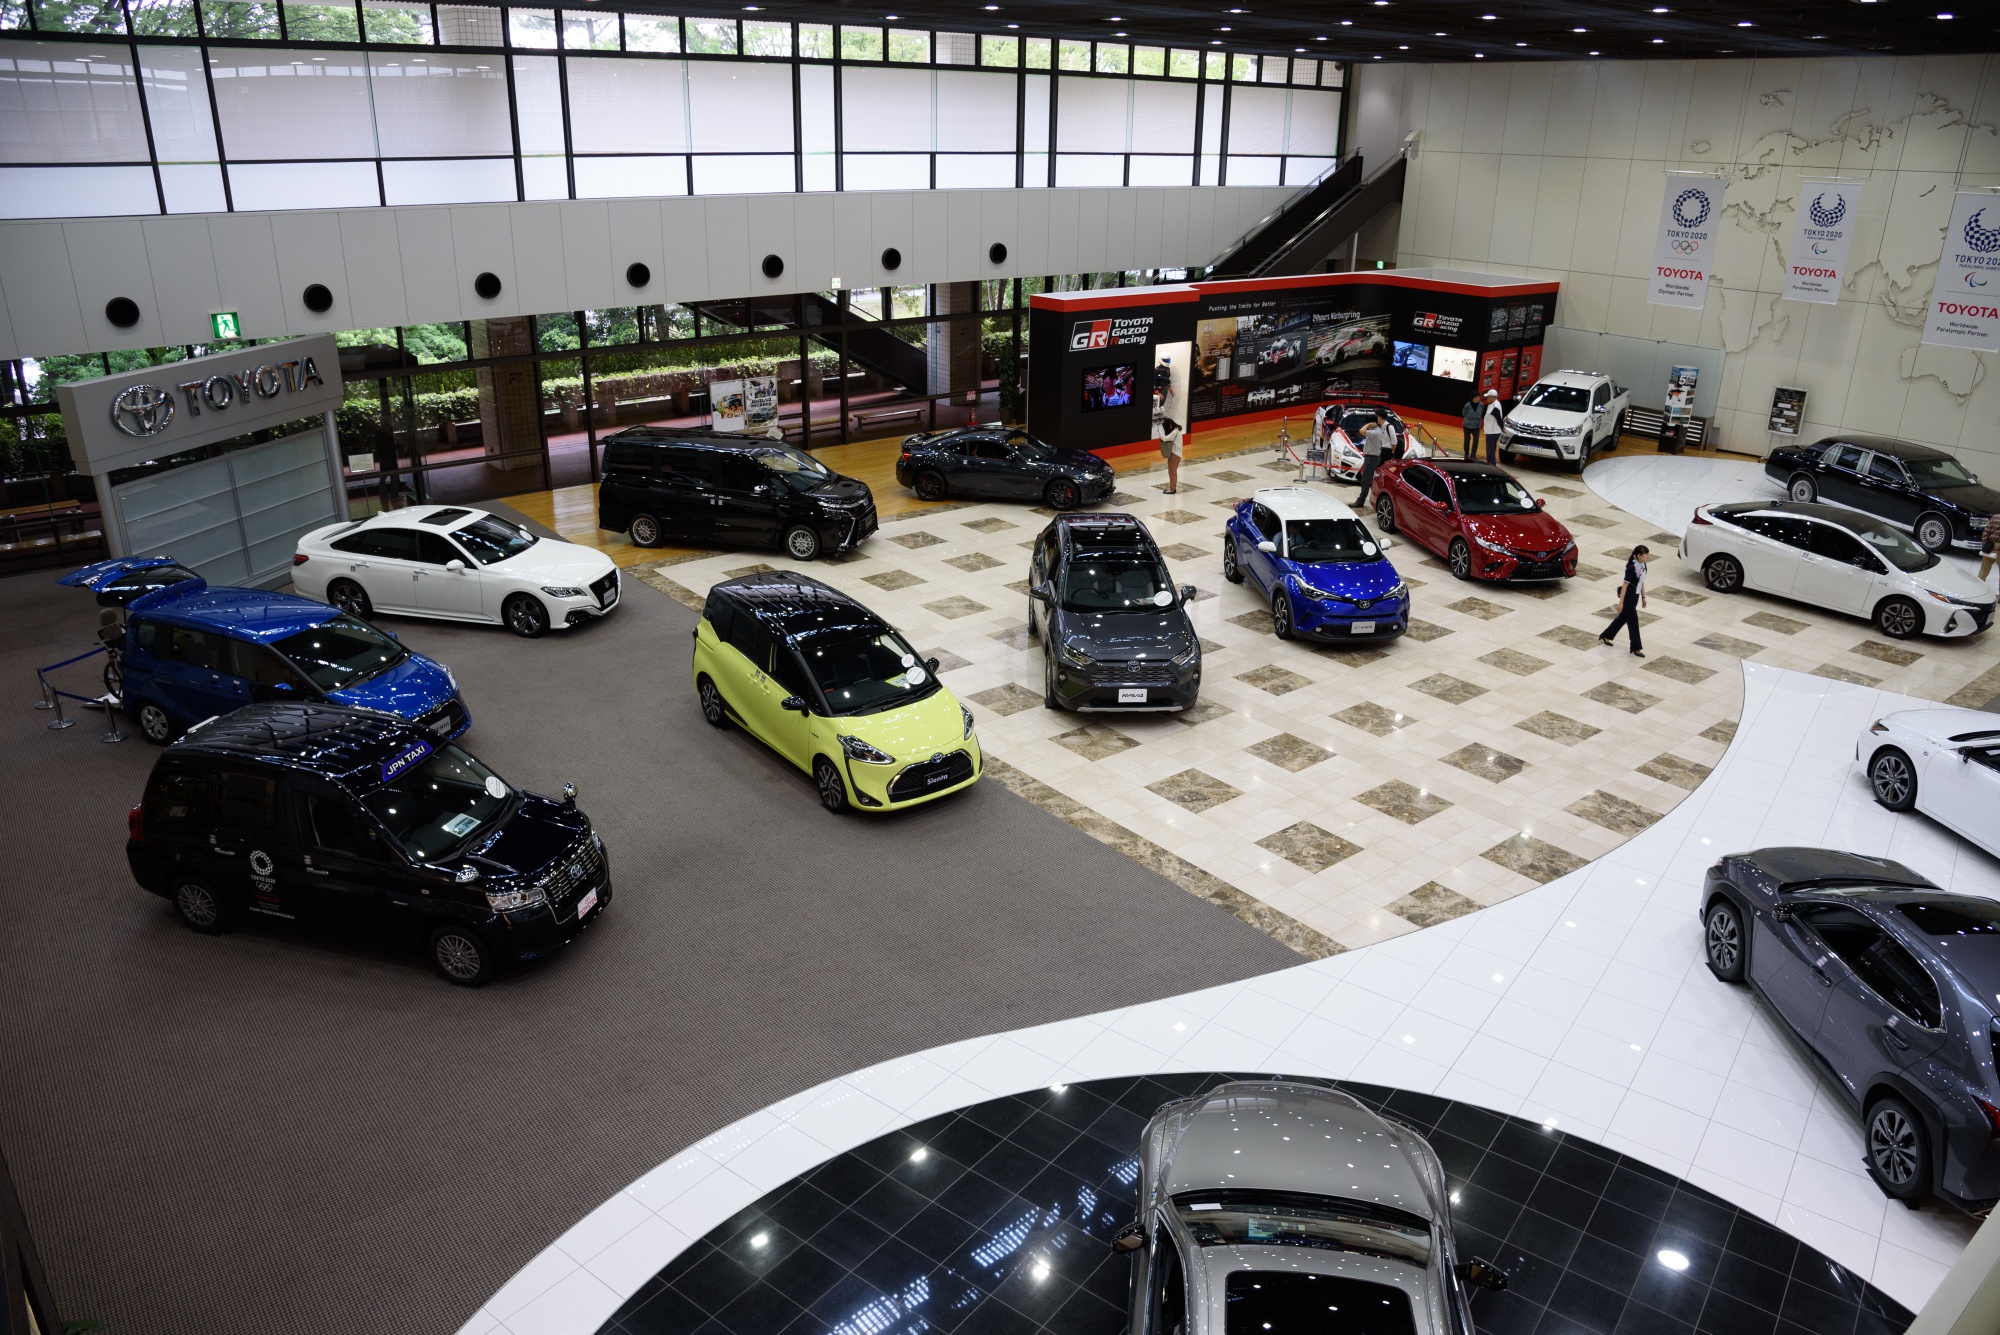 Toyota vehicles at a showroom in Toyota City.